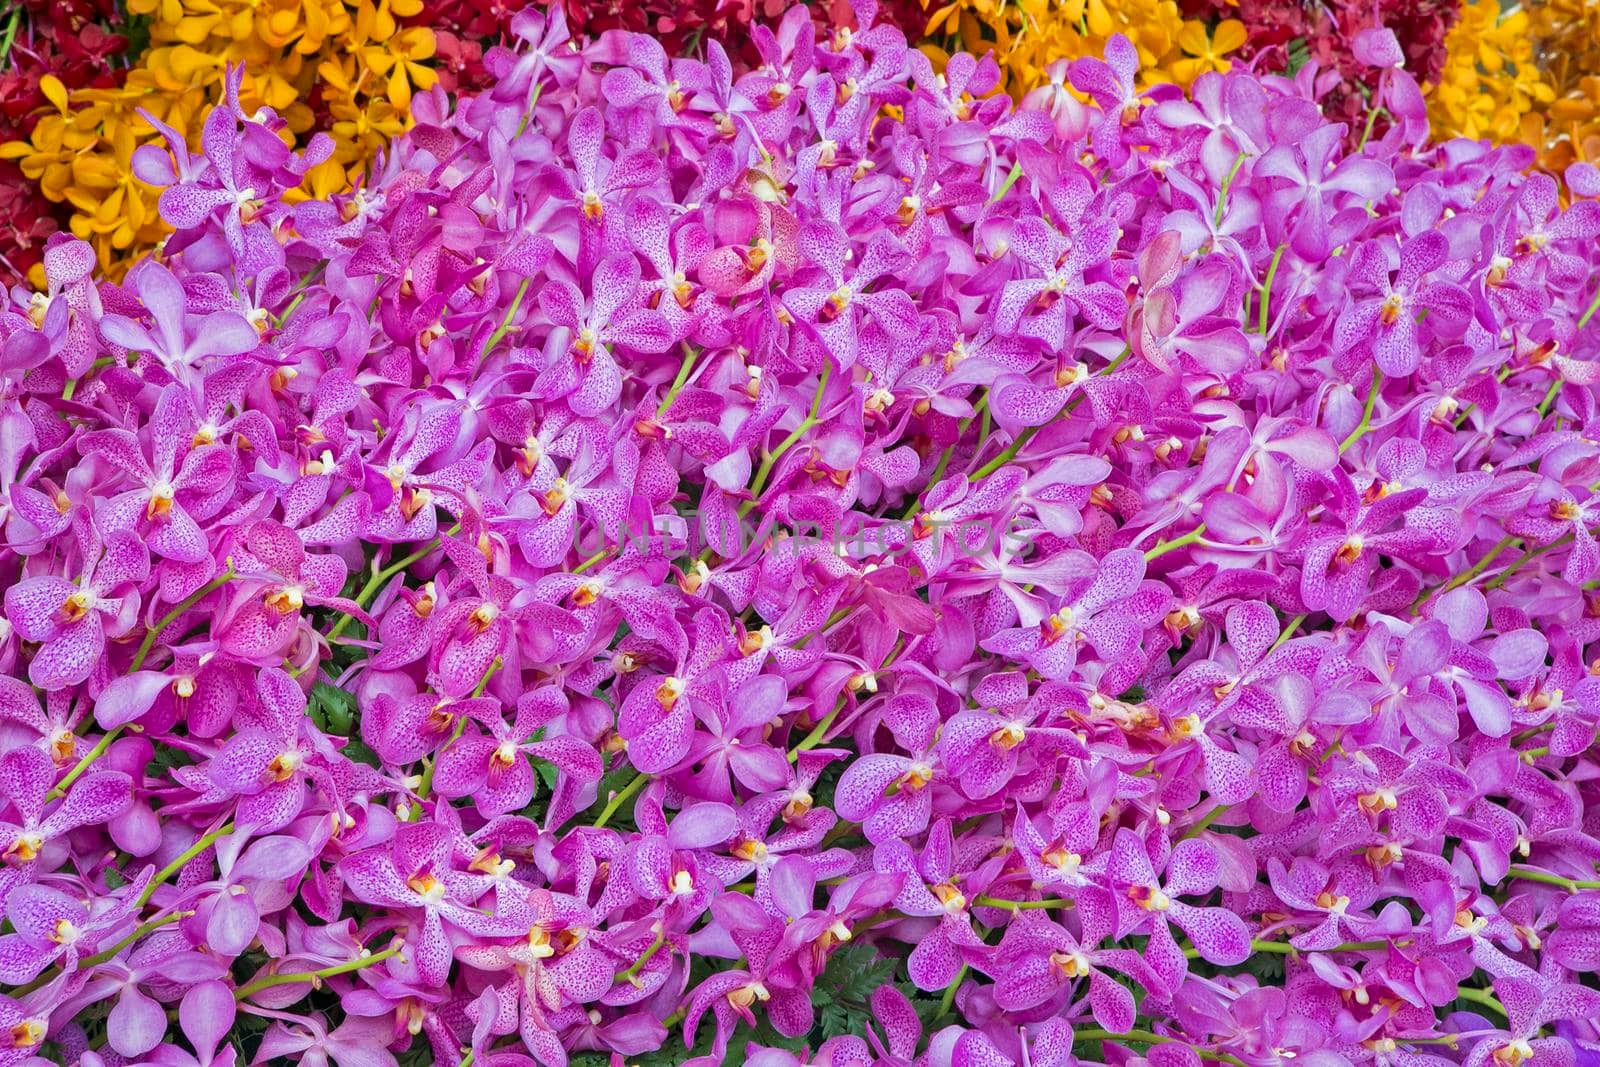 Orchid flowers with a variety of beautiful colors.